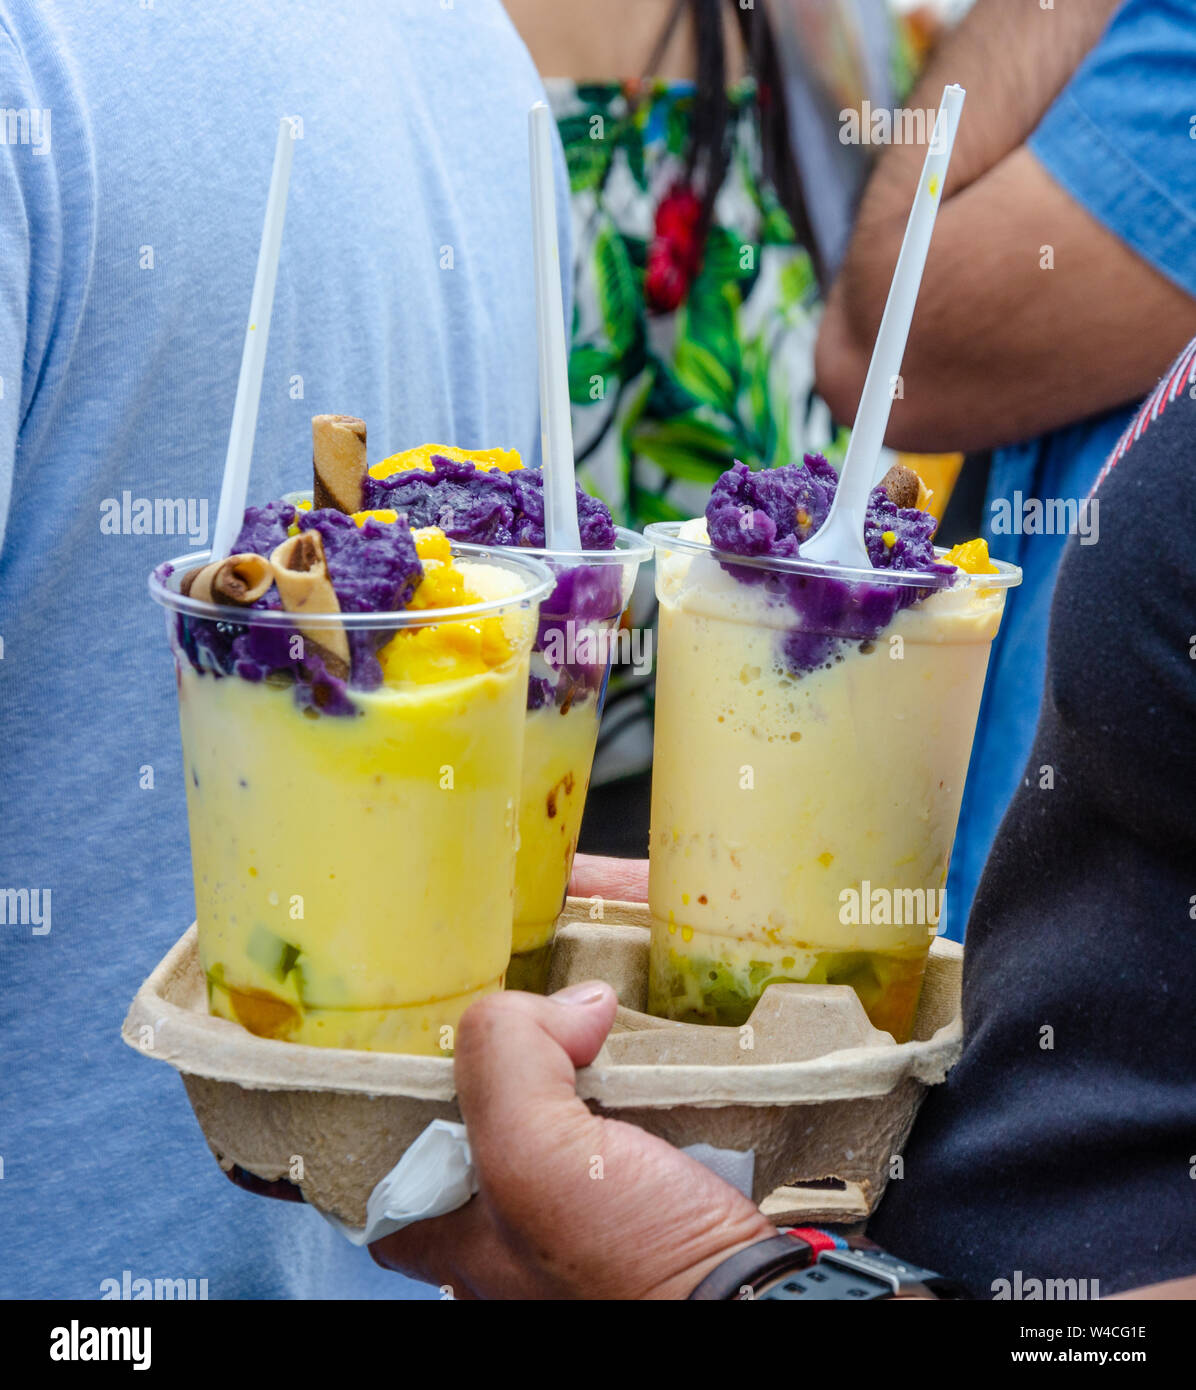 Halo halo is a populat Filipino cold dessert or drink made from crushed ice, evaporated milk and fruits. Stock Photo